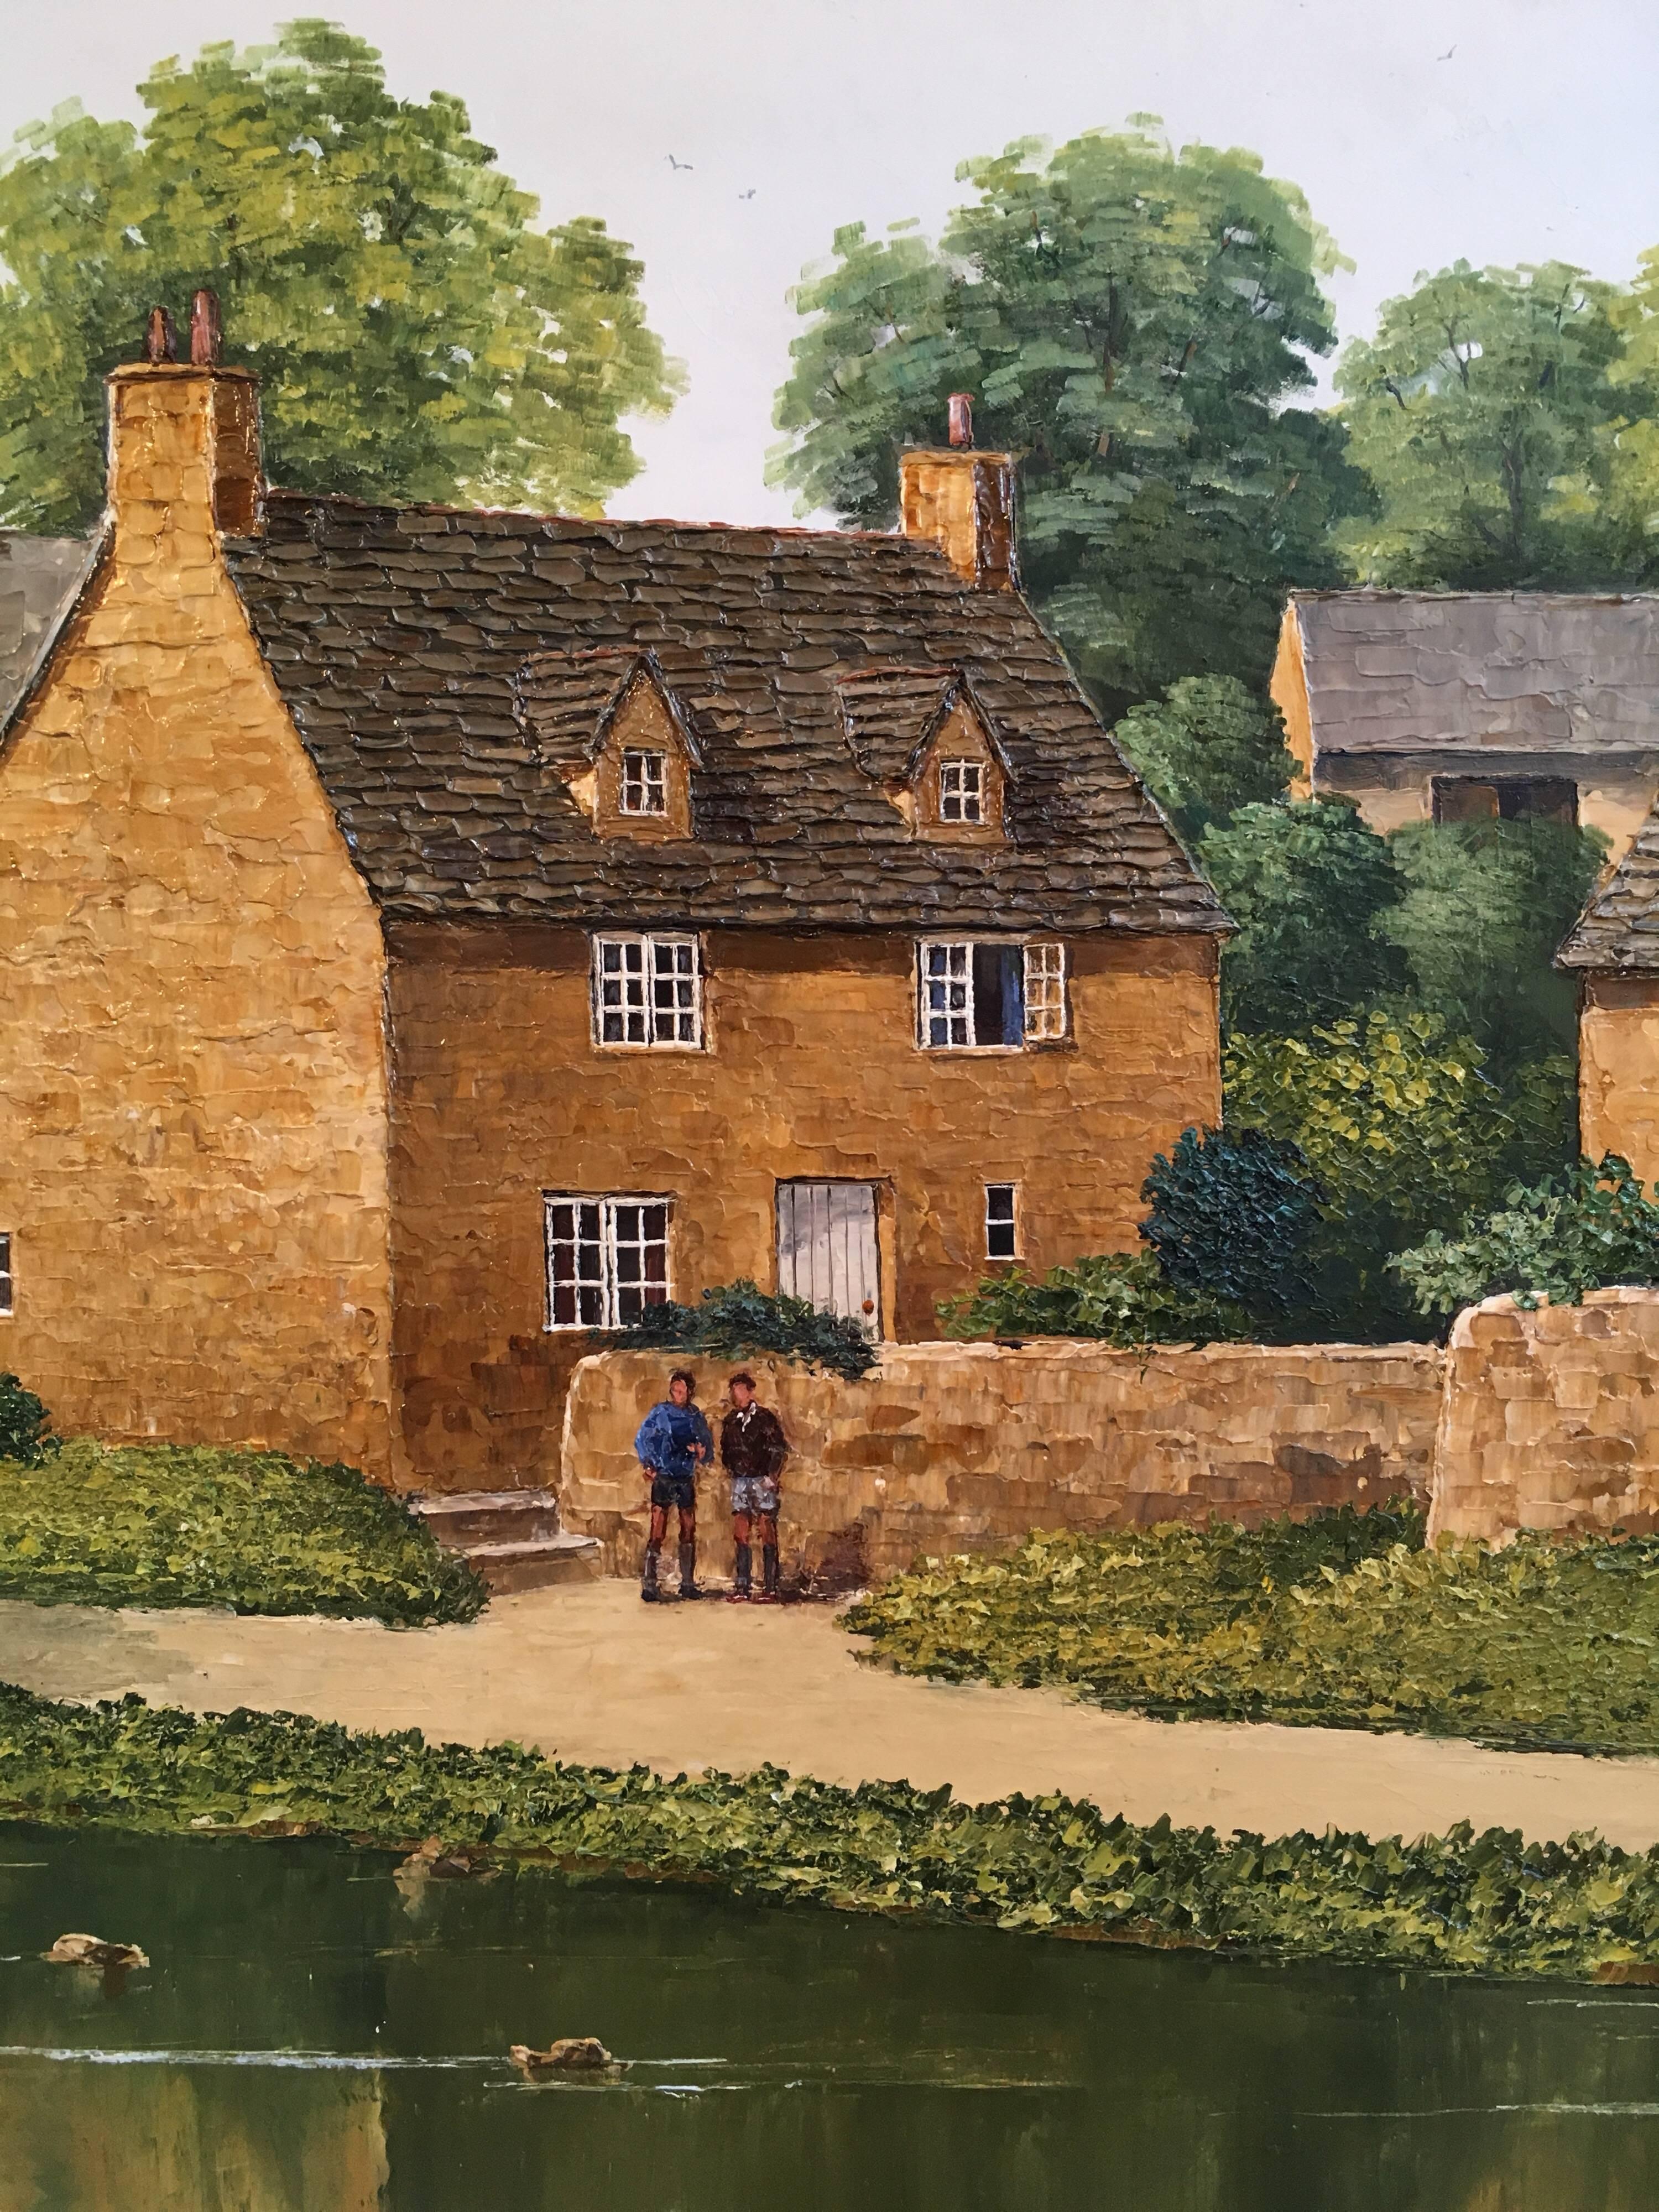 English Cottages, Large Landscape, Signed Oil
British schooled artist 'Nick Bradley-Capture' 20th Century
Signed by the artist on the lower left hand corner, signed verso
Oil painting on canvas, framed
Framed size: 35 x 25 inches

Idyllic scene of